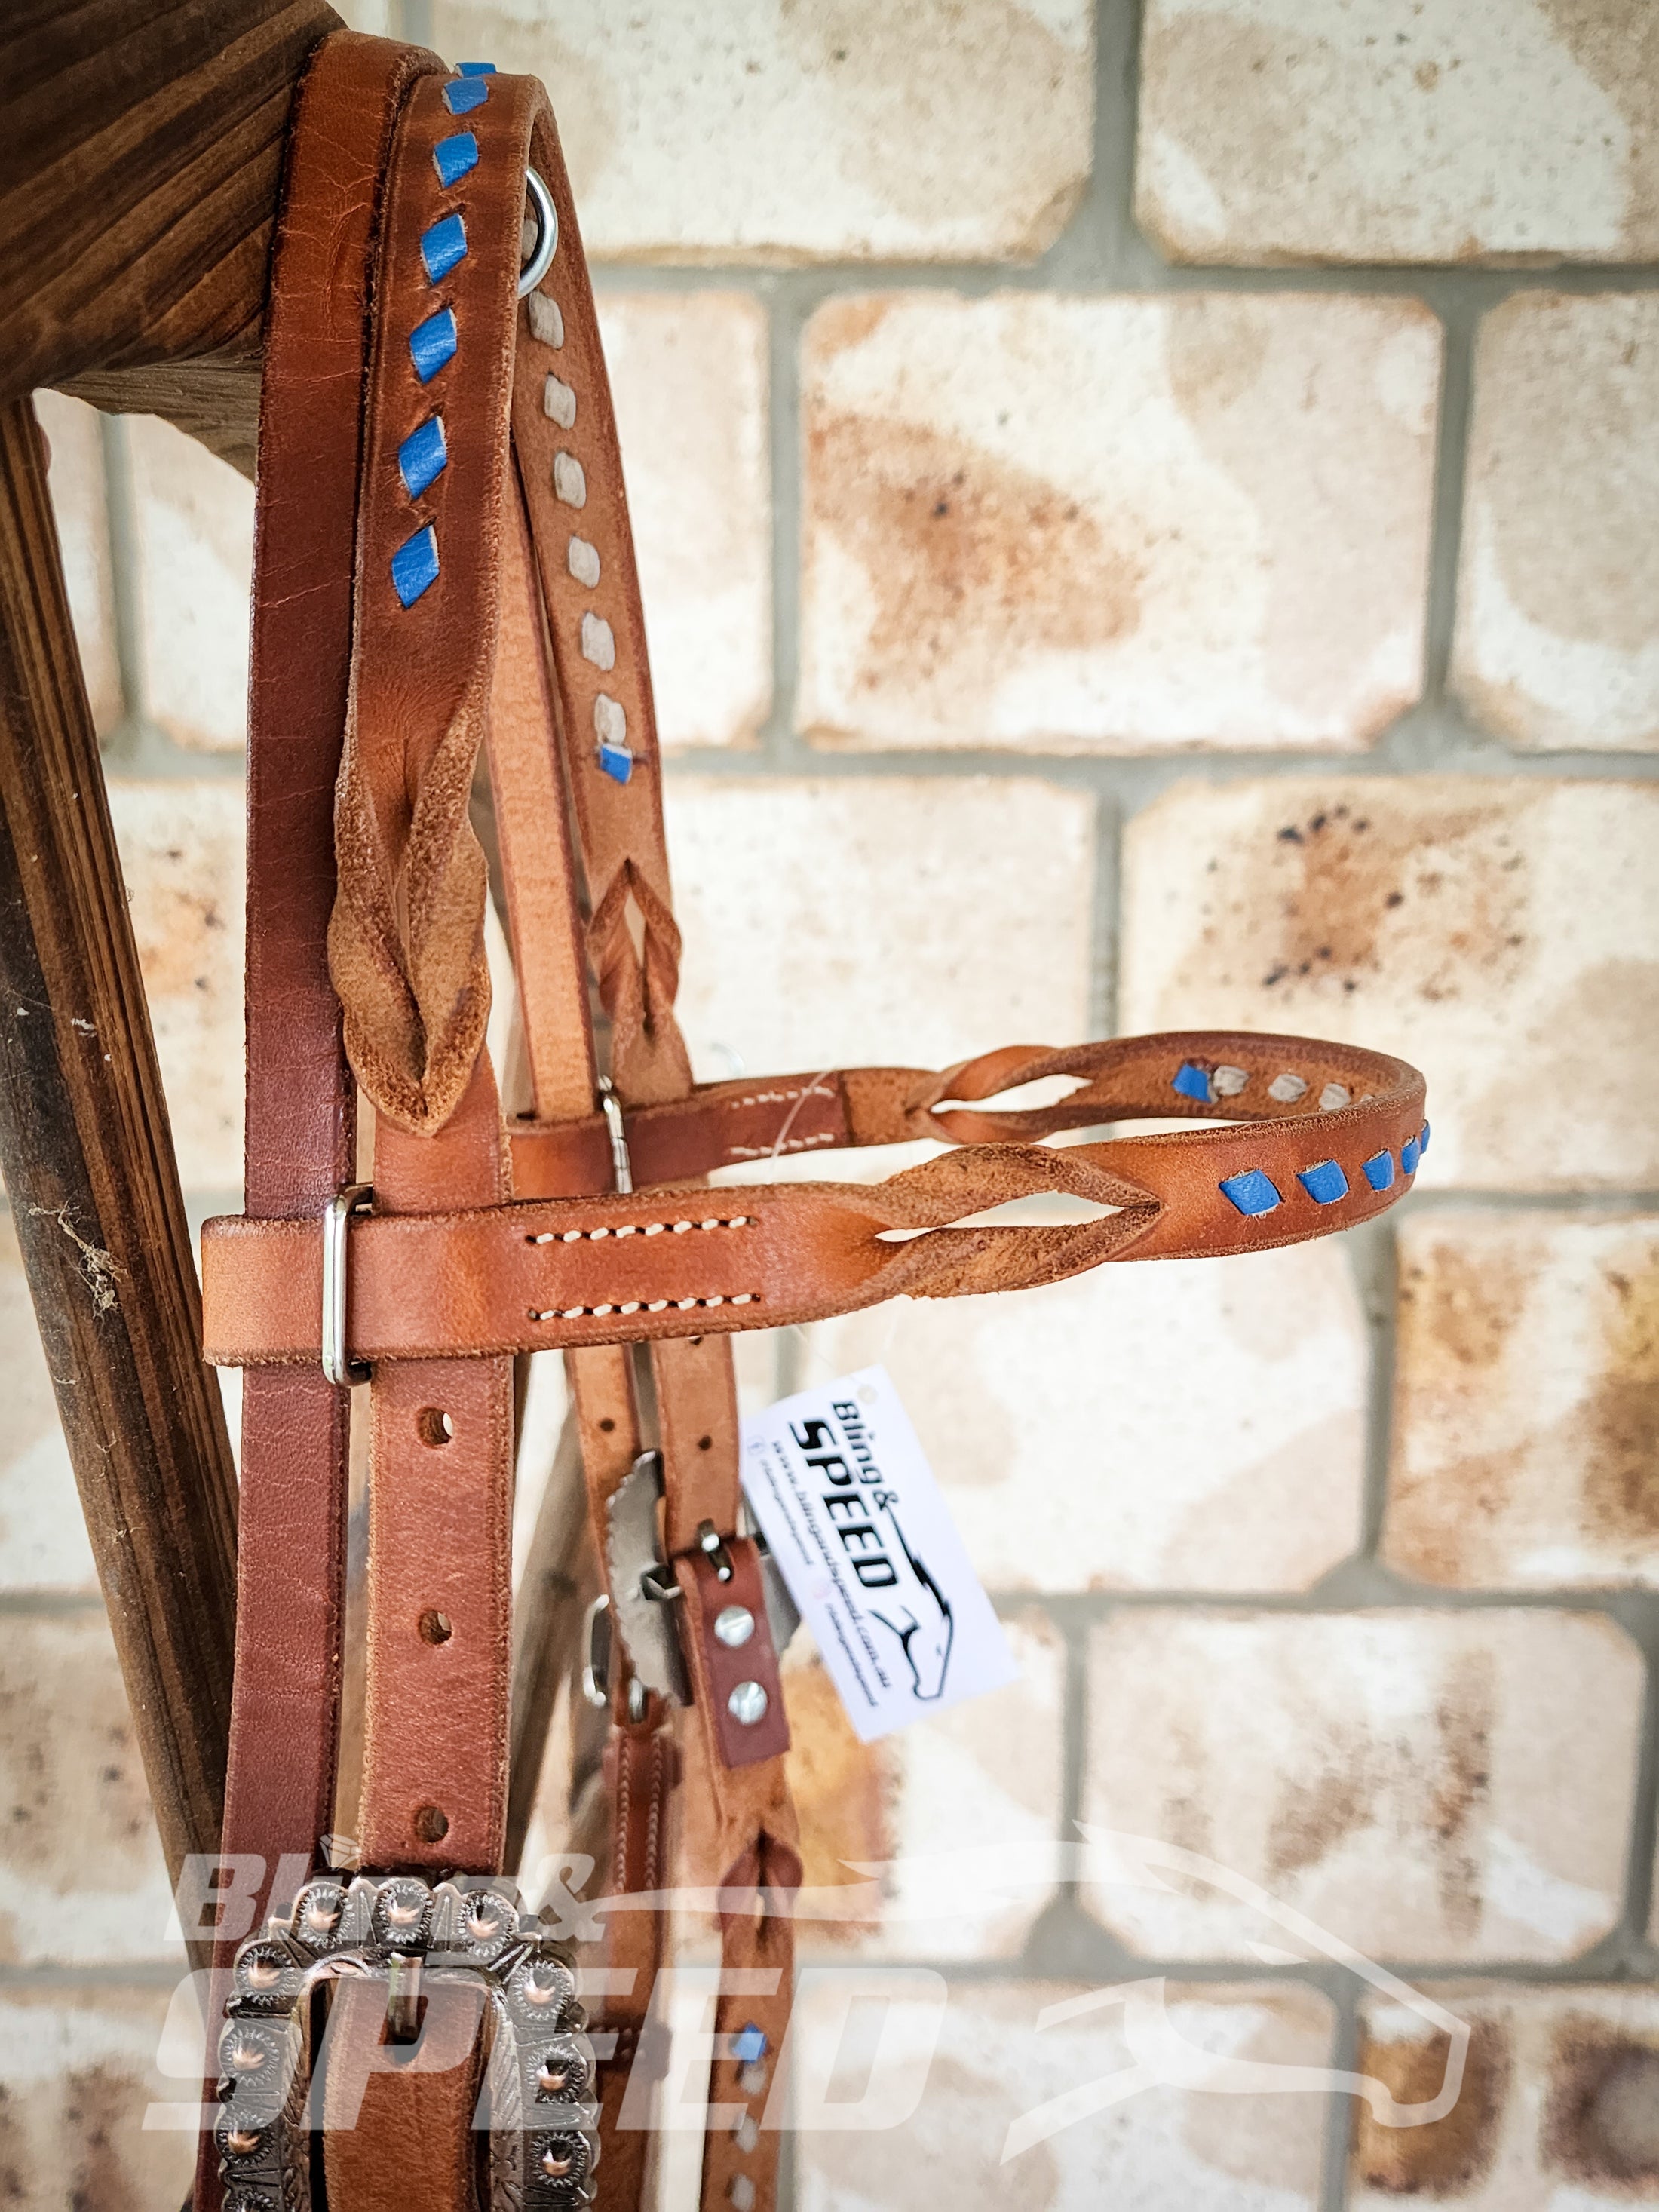 Bling and Speed Blue Buckstitched with Twisted Bloodknot Bridle (7981440401646)